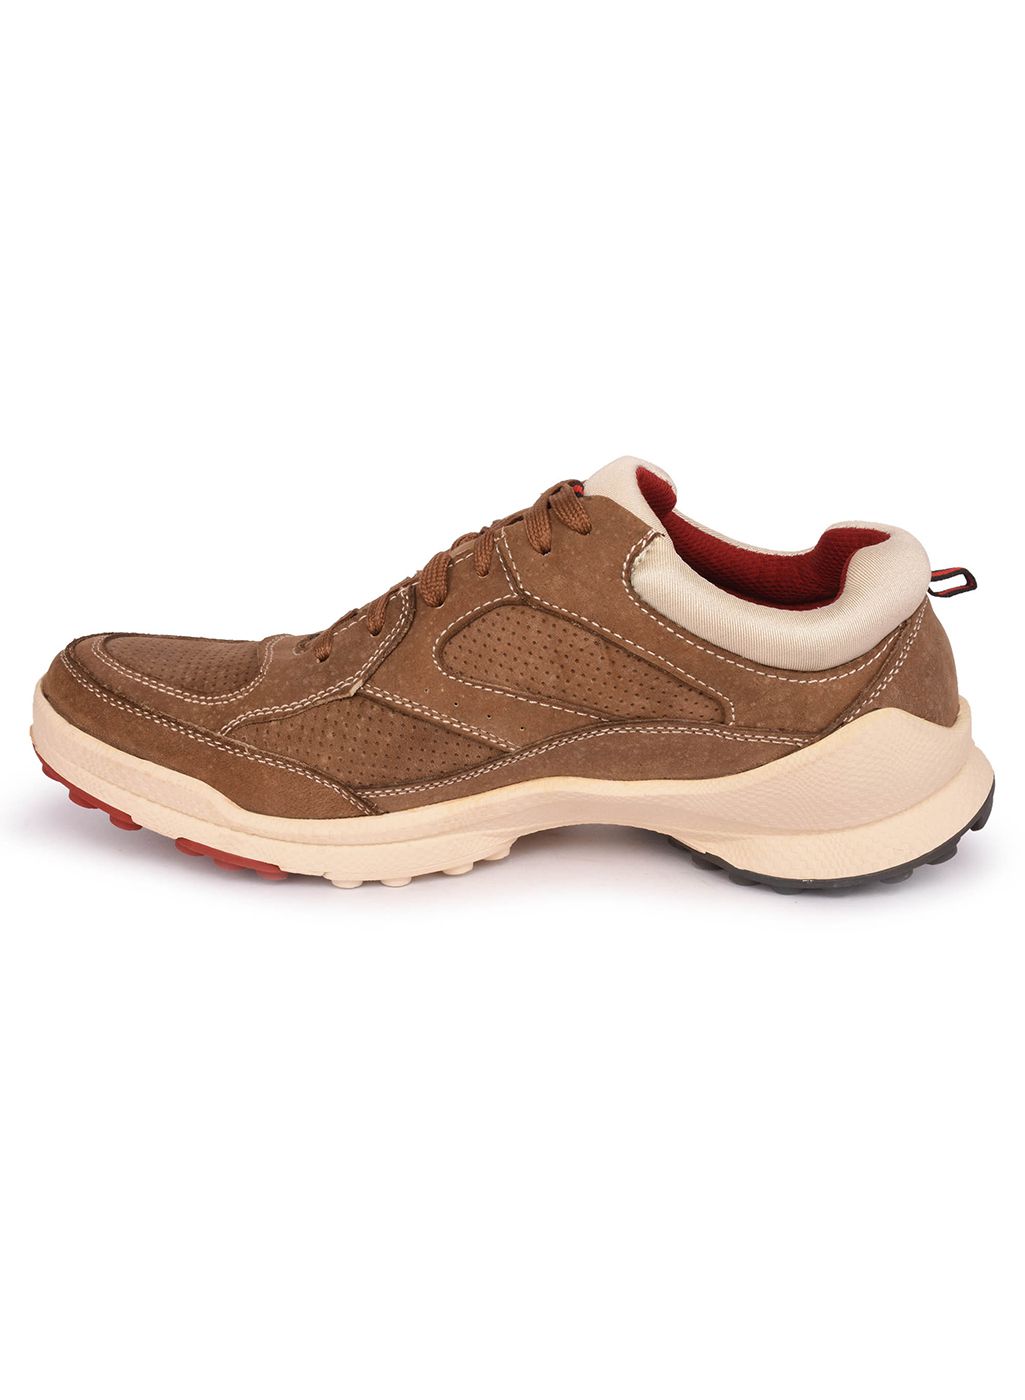 Action Brown Running Shoes - Buy Action Brown Running Shoes Online at ...